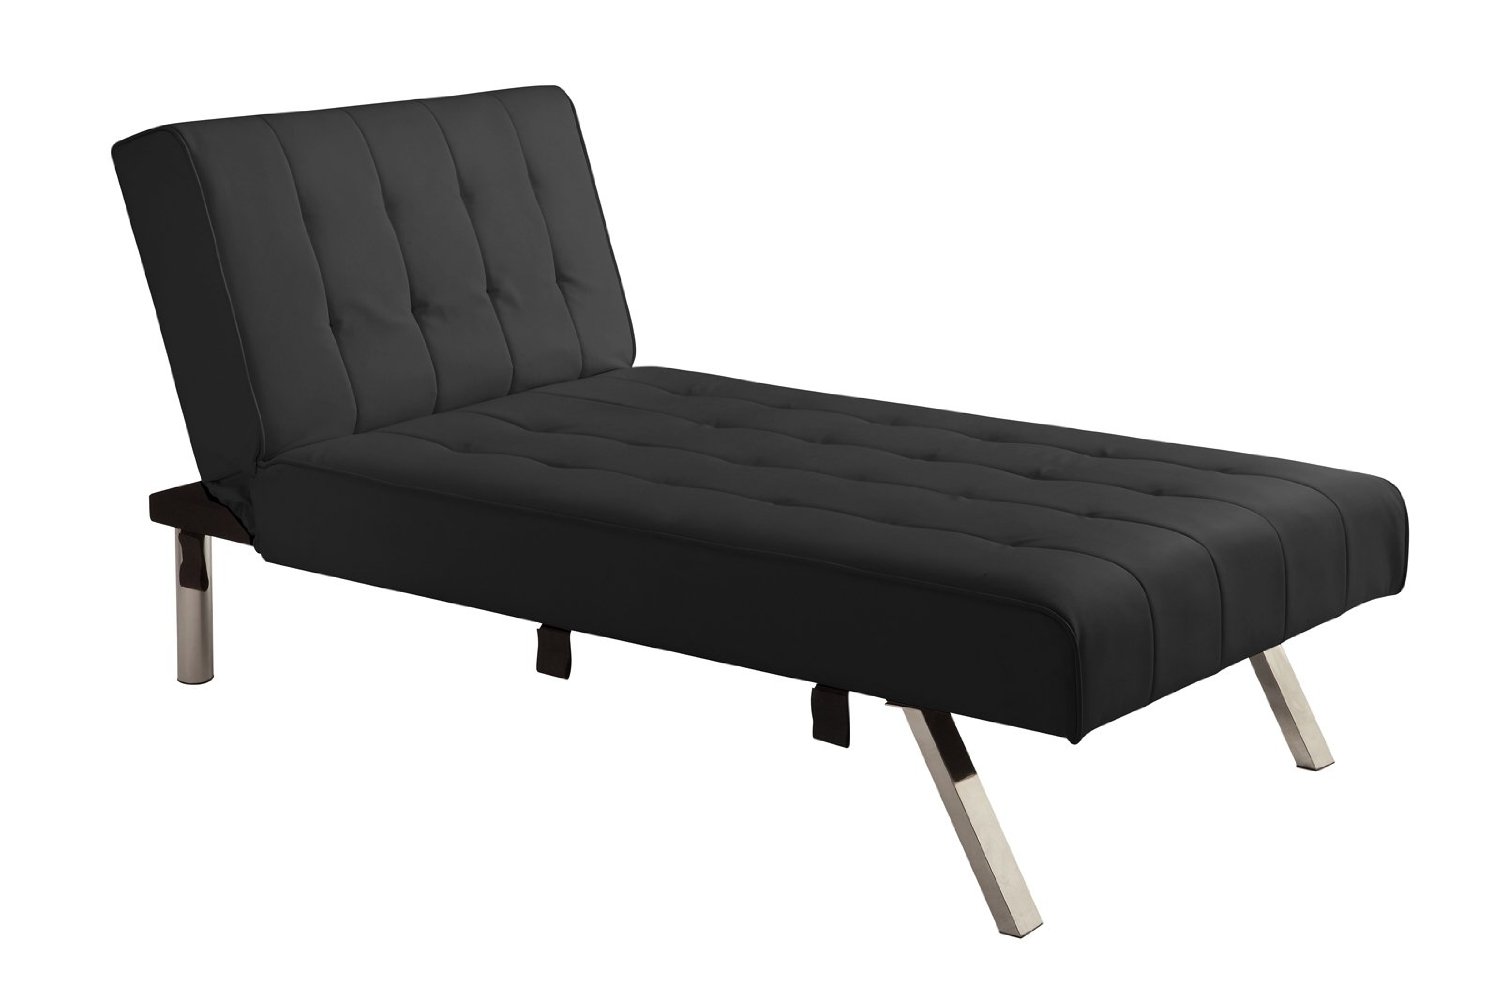 DHP Emily Chaise Lounger, Black